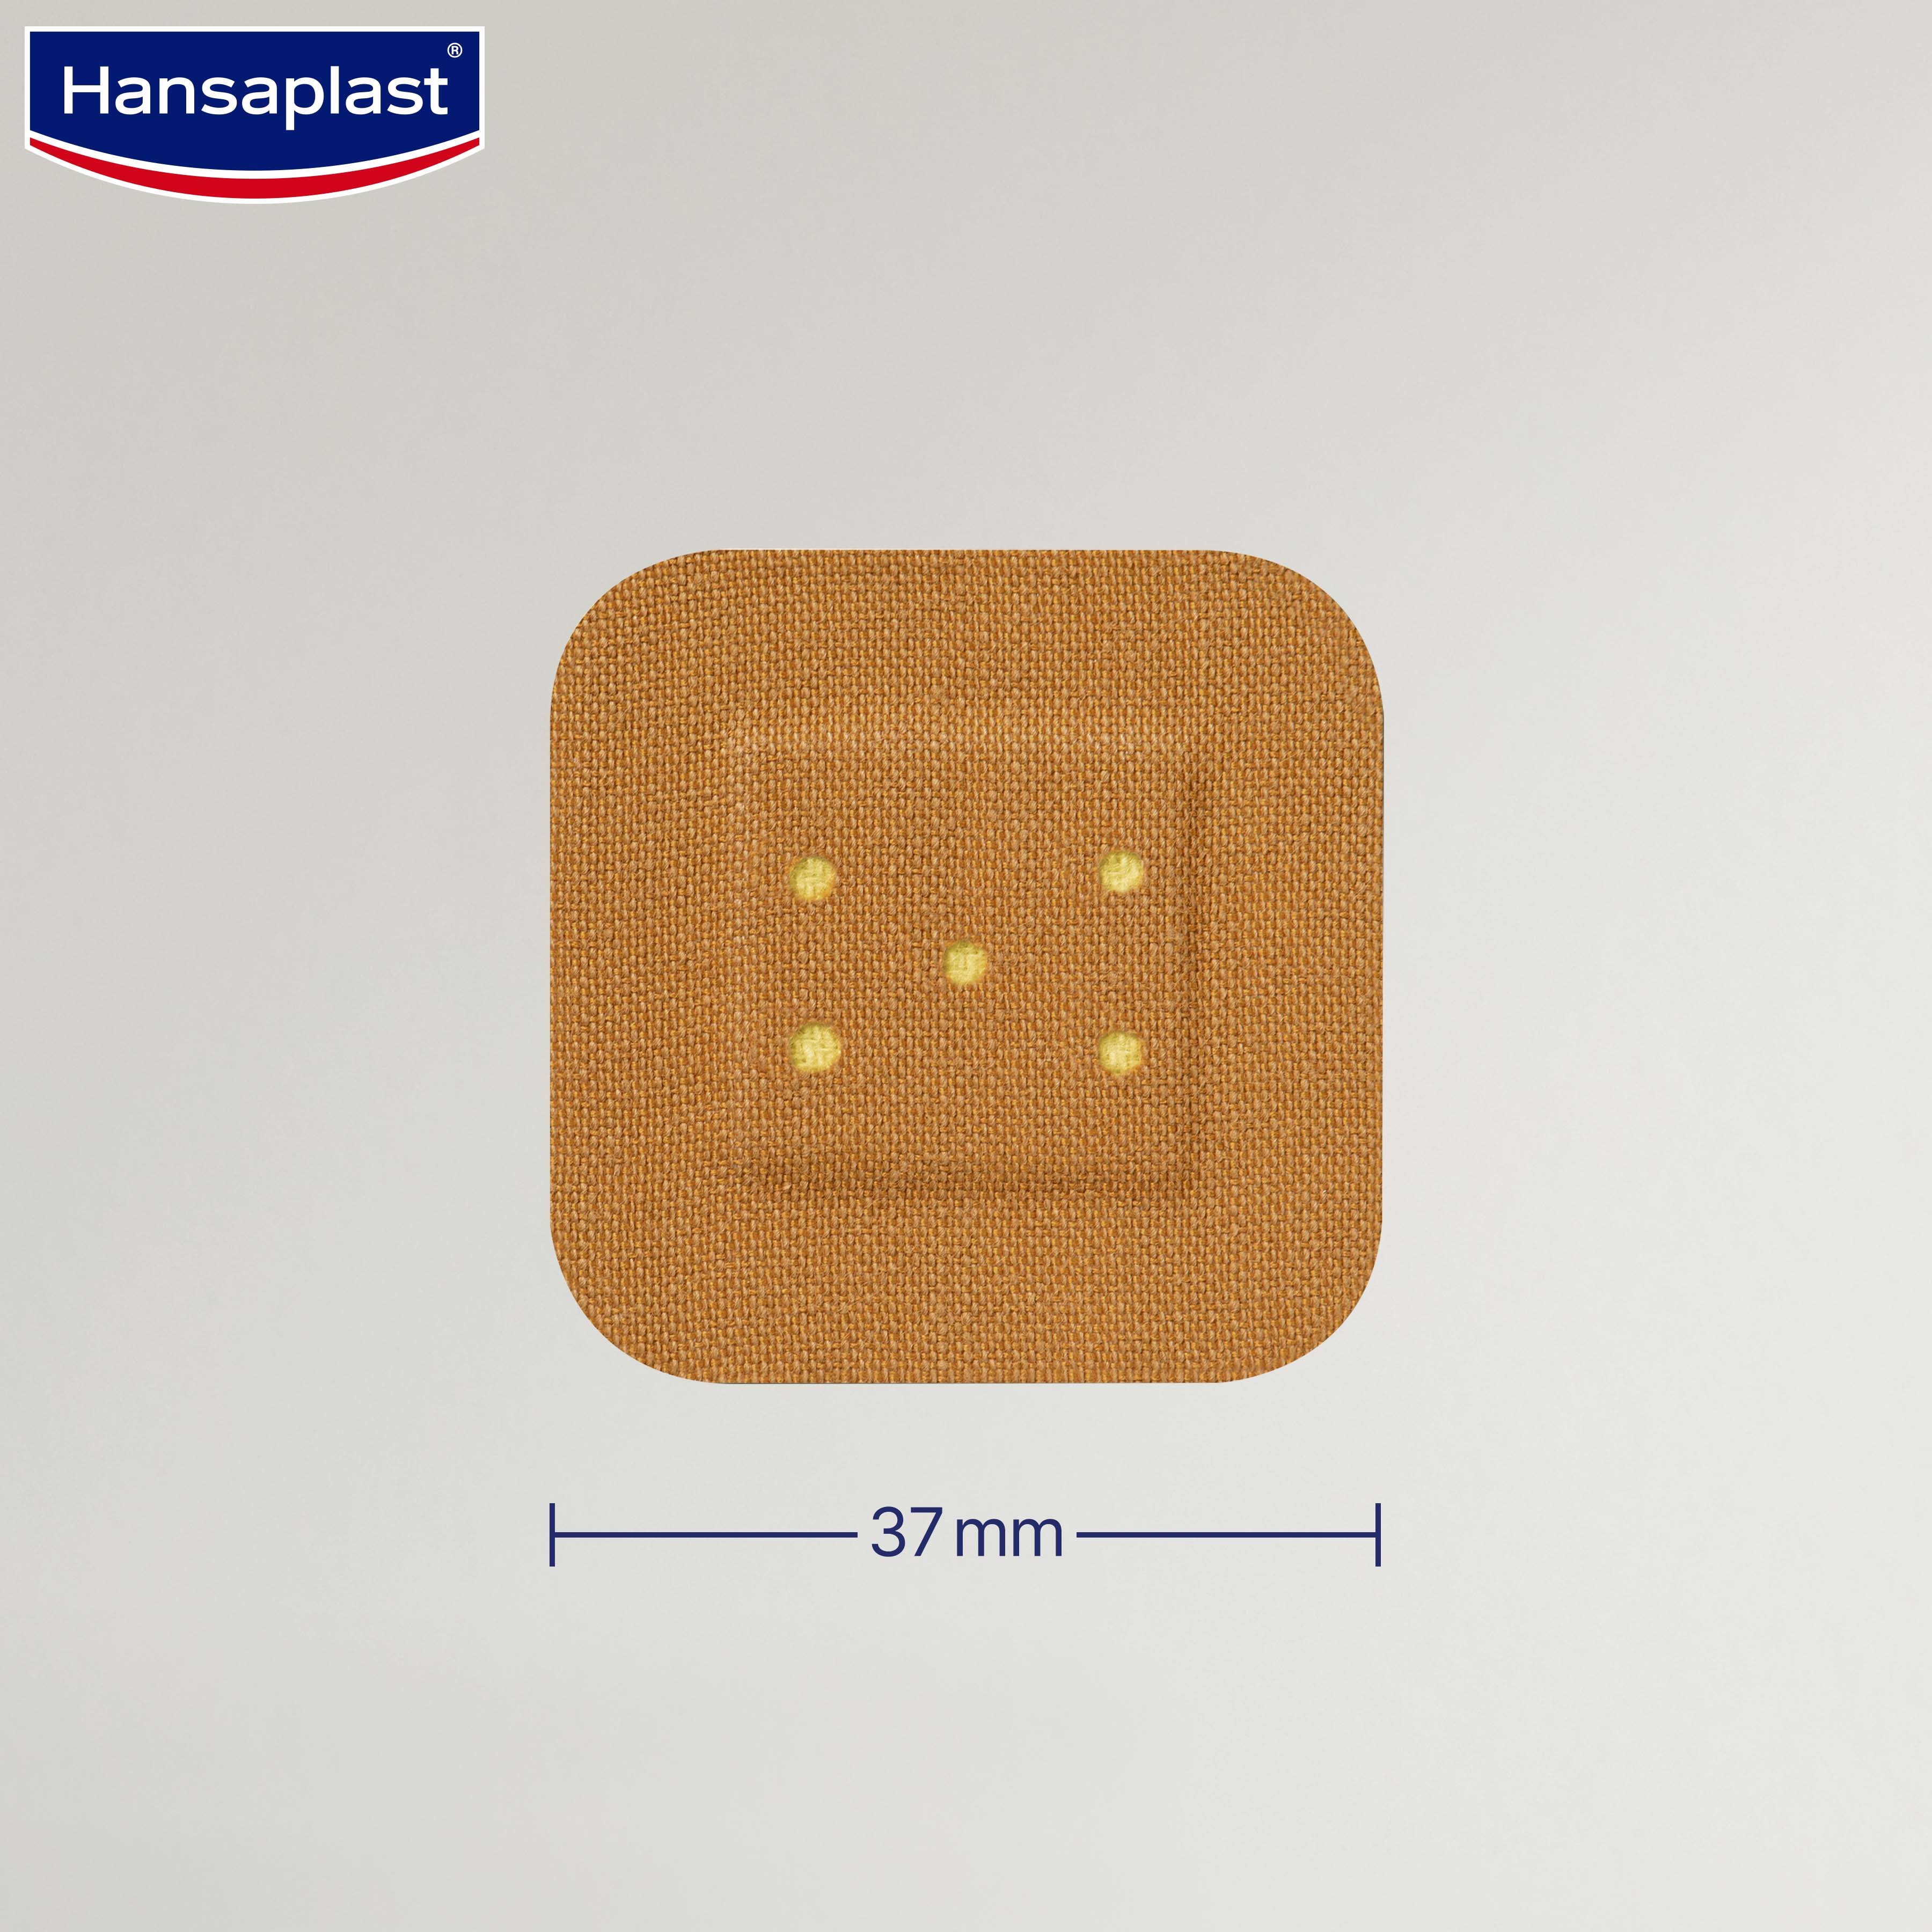 Patch Plaster Small Box | Antiseptic plaster for elbows and knees | Hansaplast